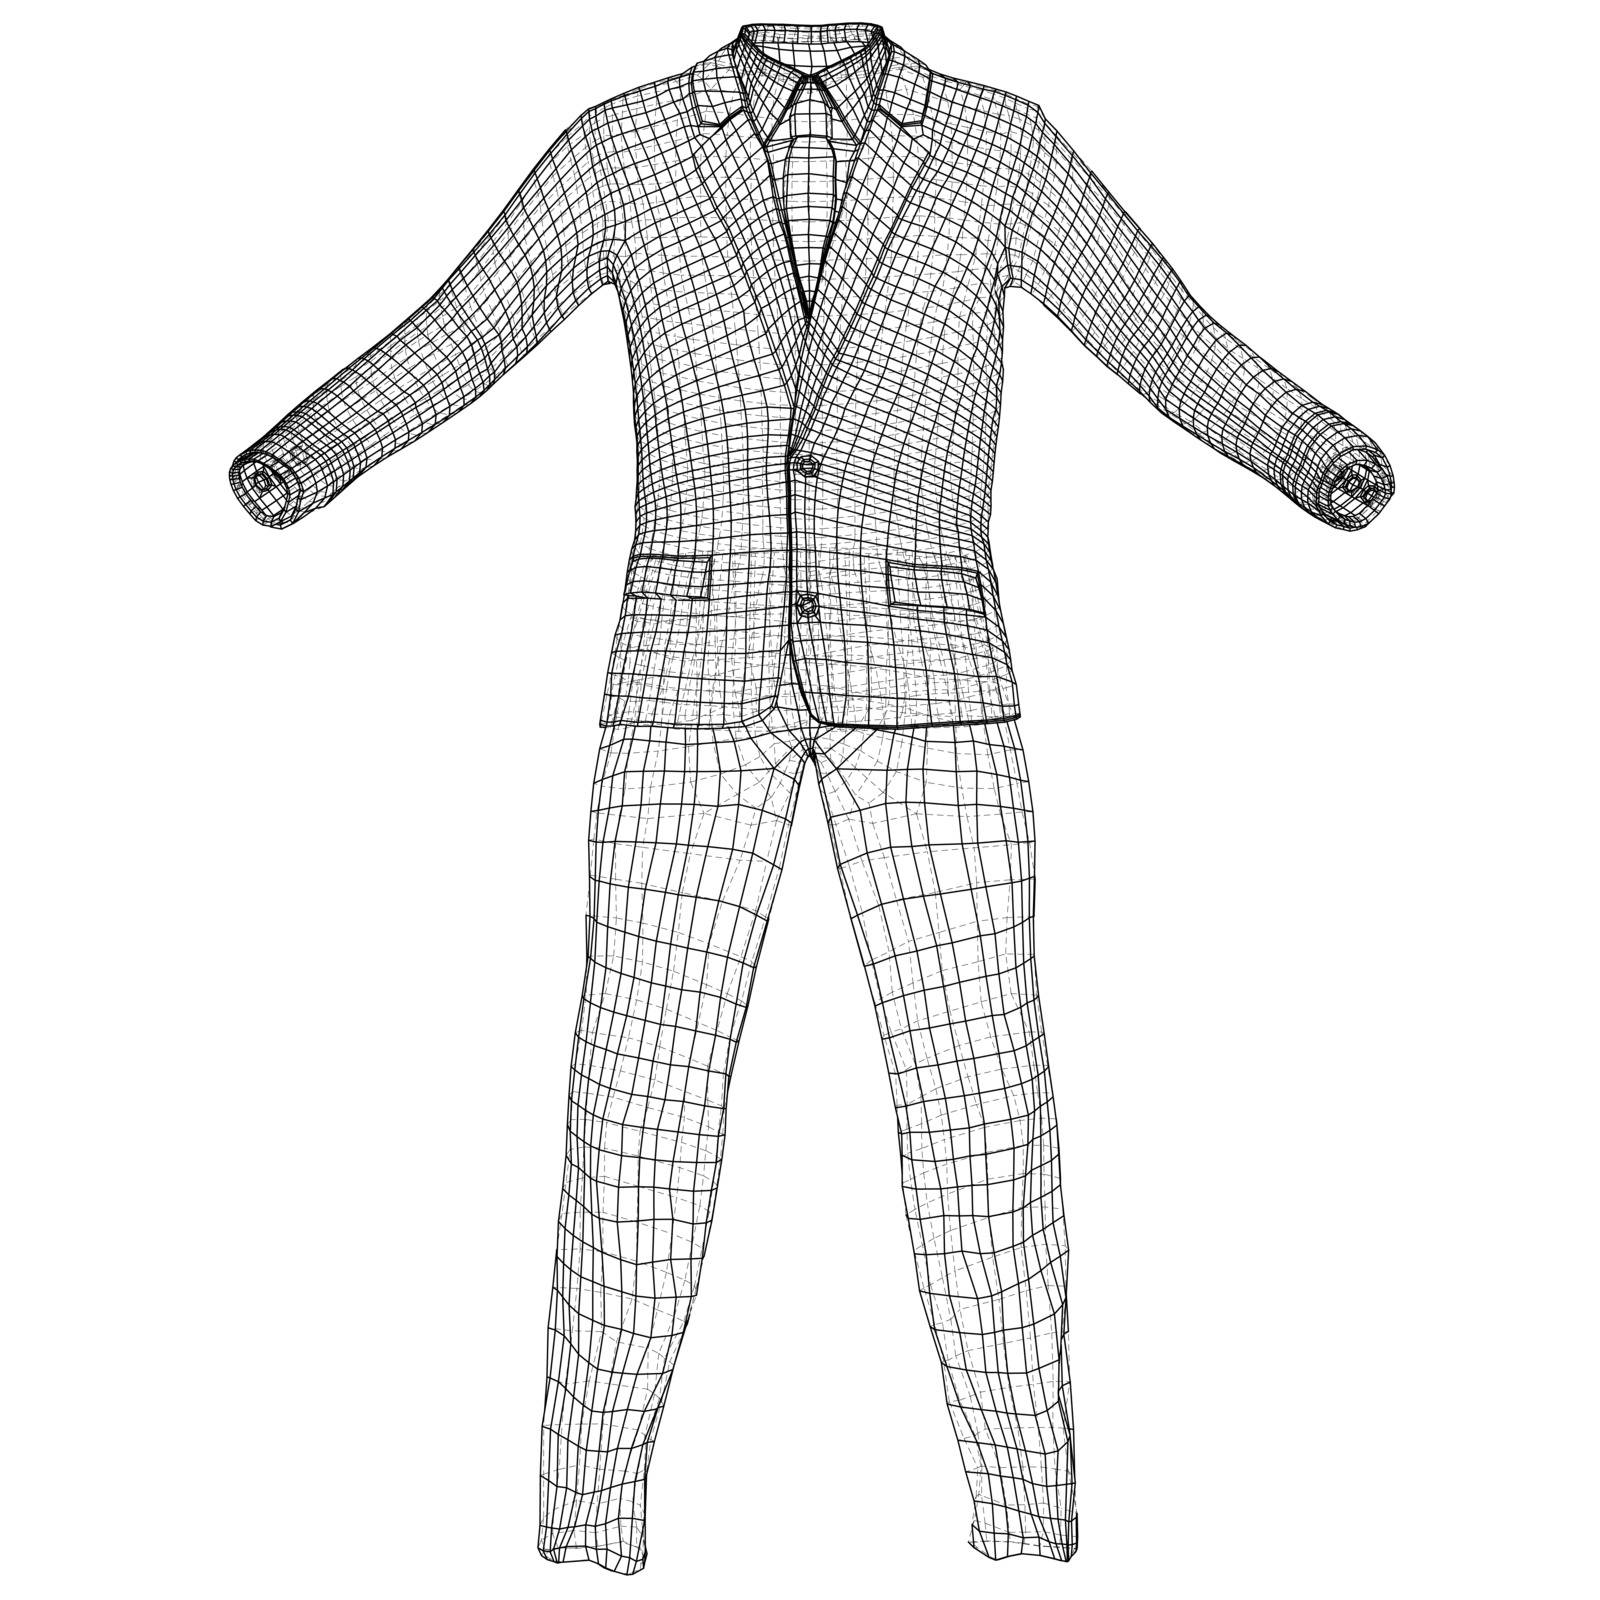 Mans suit in wire-frame style. Vector rendering of 3d